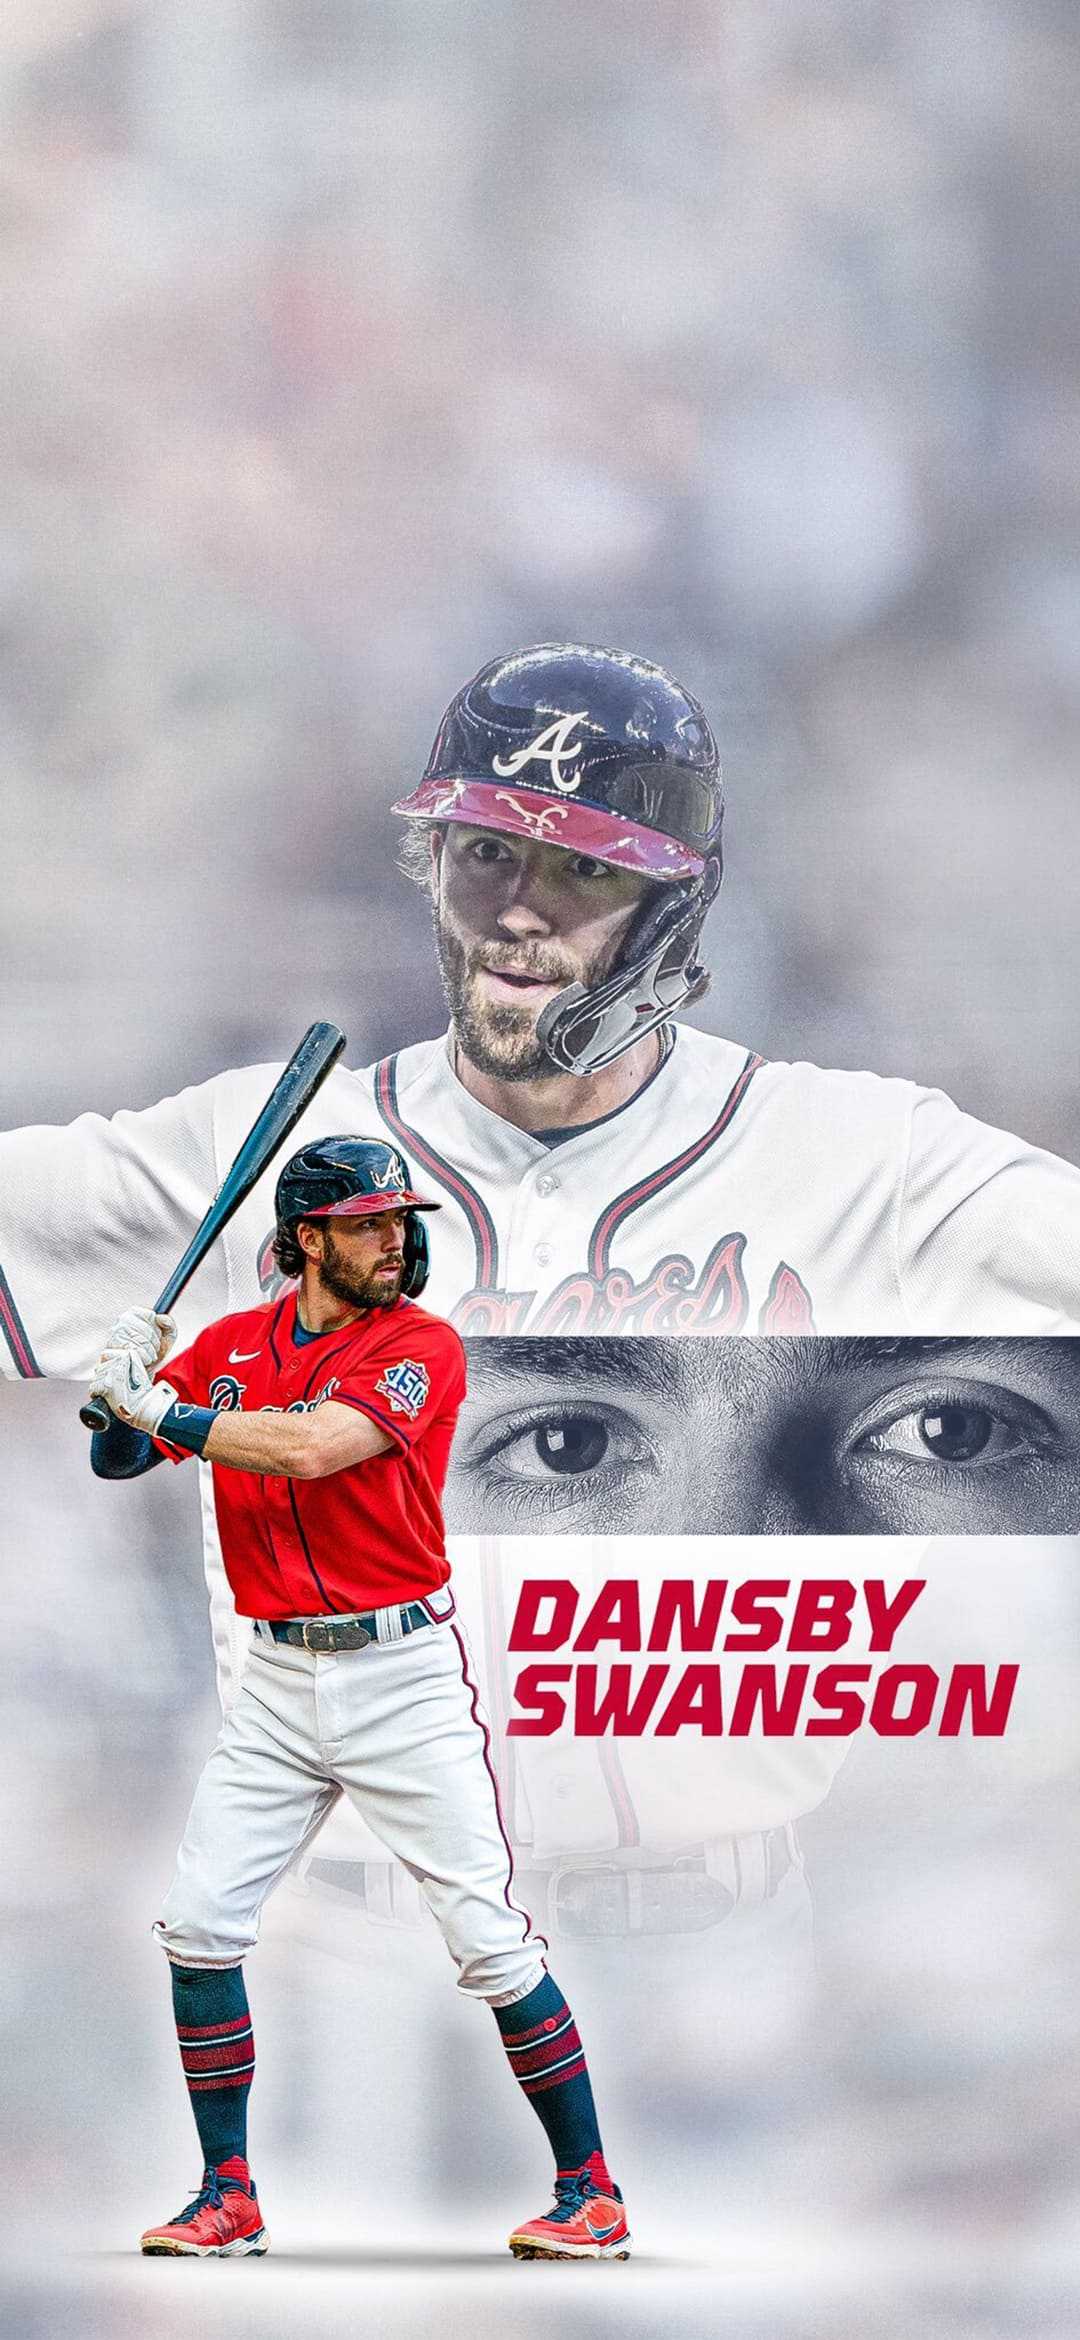 Dansby Swanson Wallpapers - iXpap